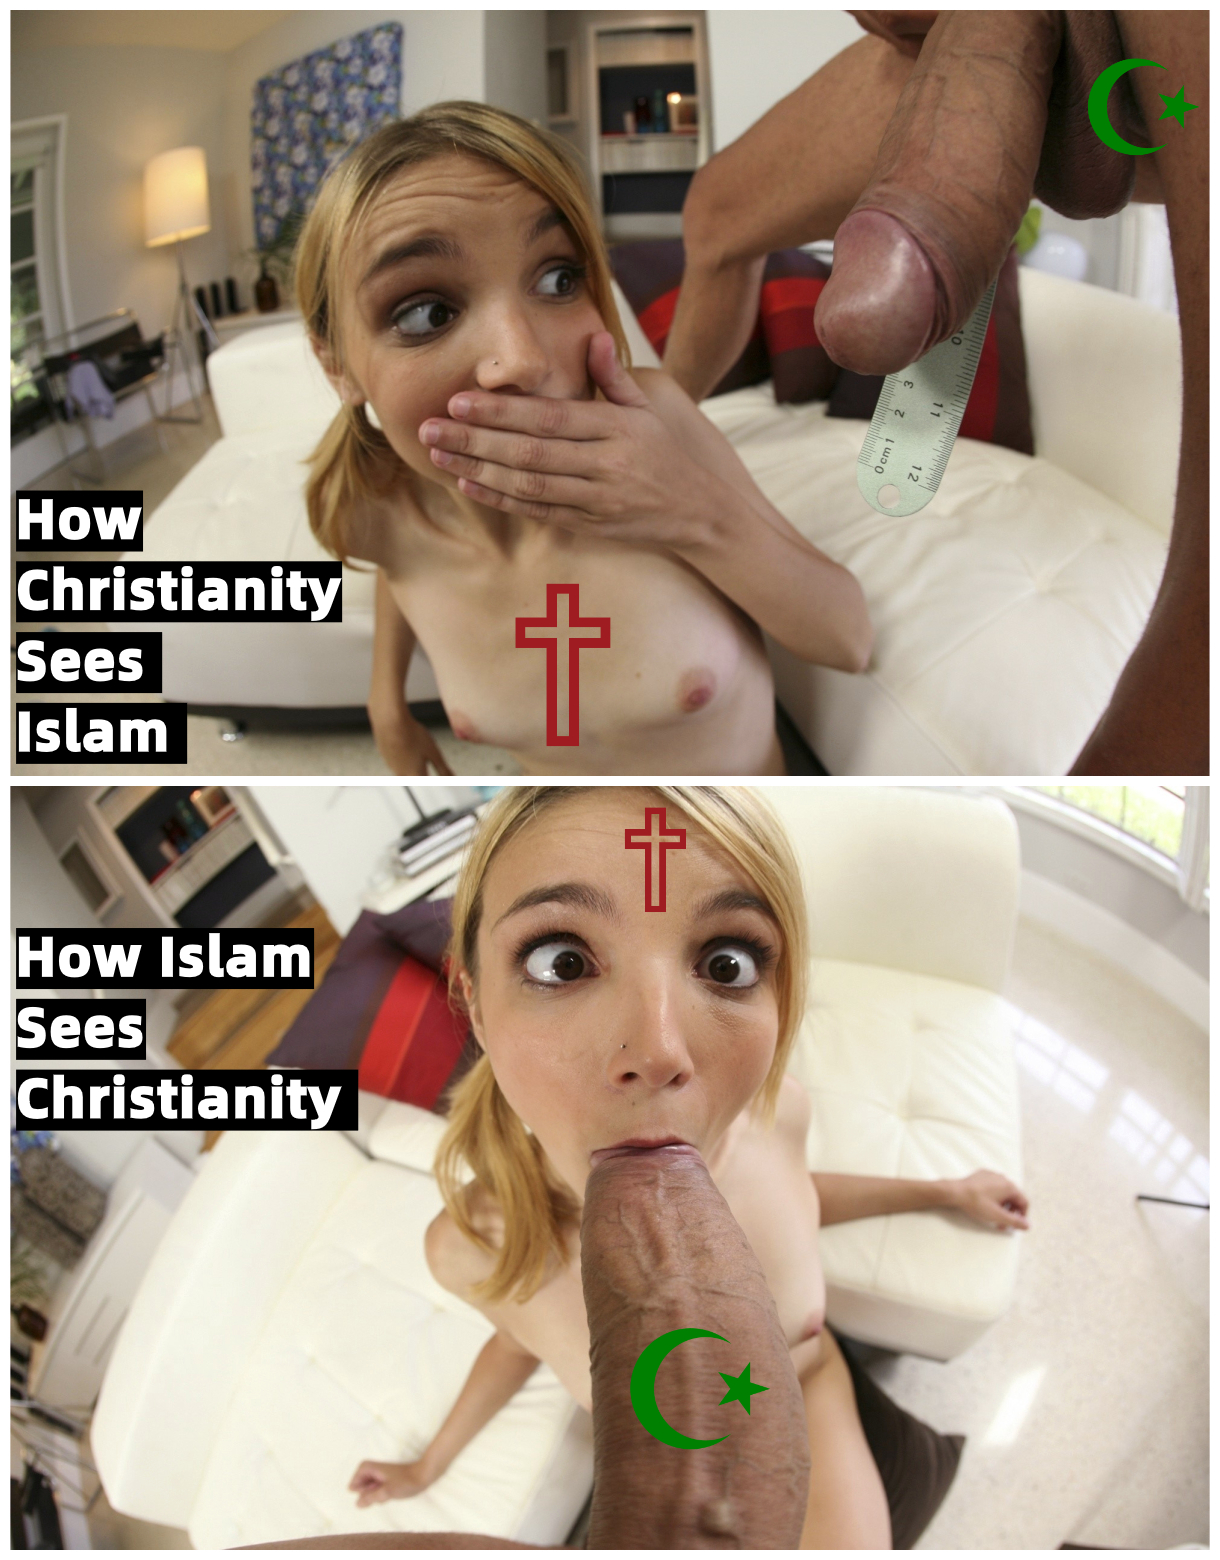 Christianity is Islam's Bitch